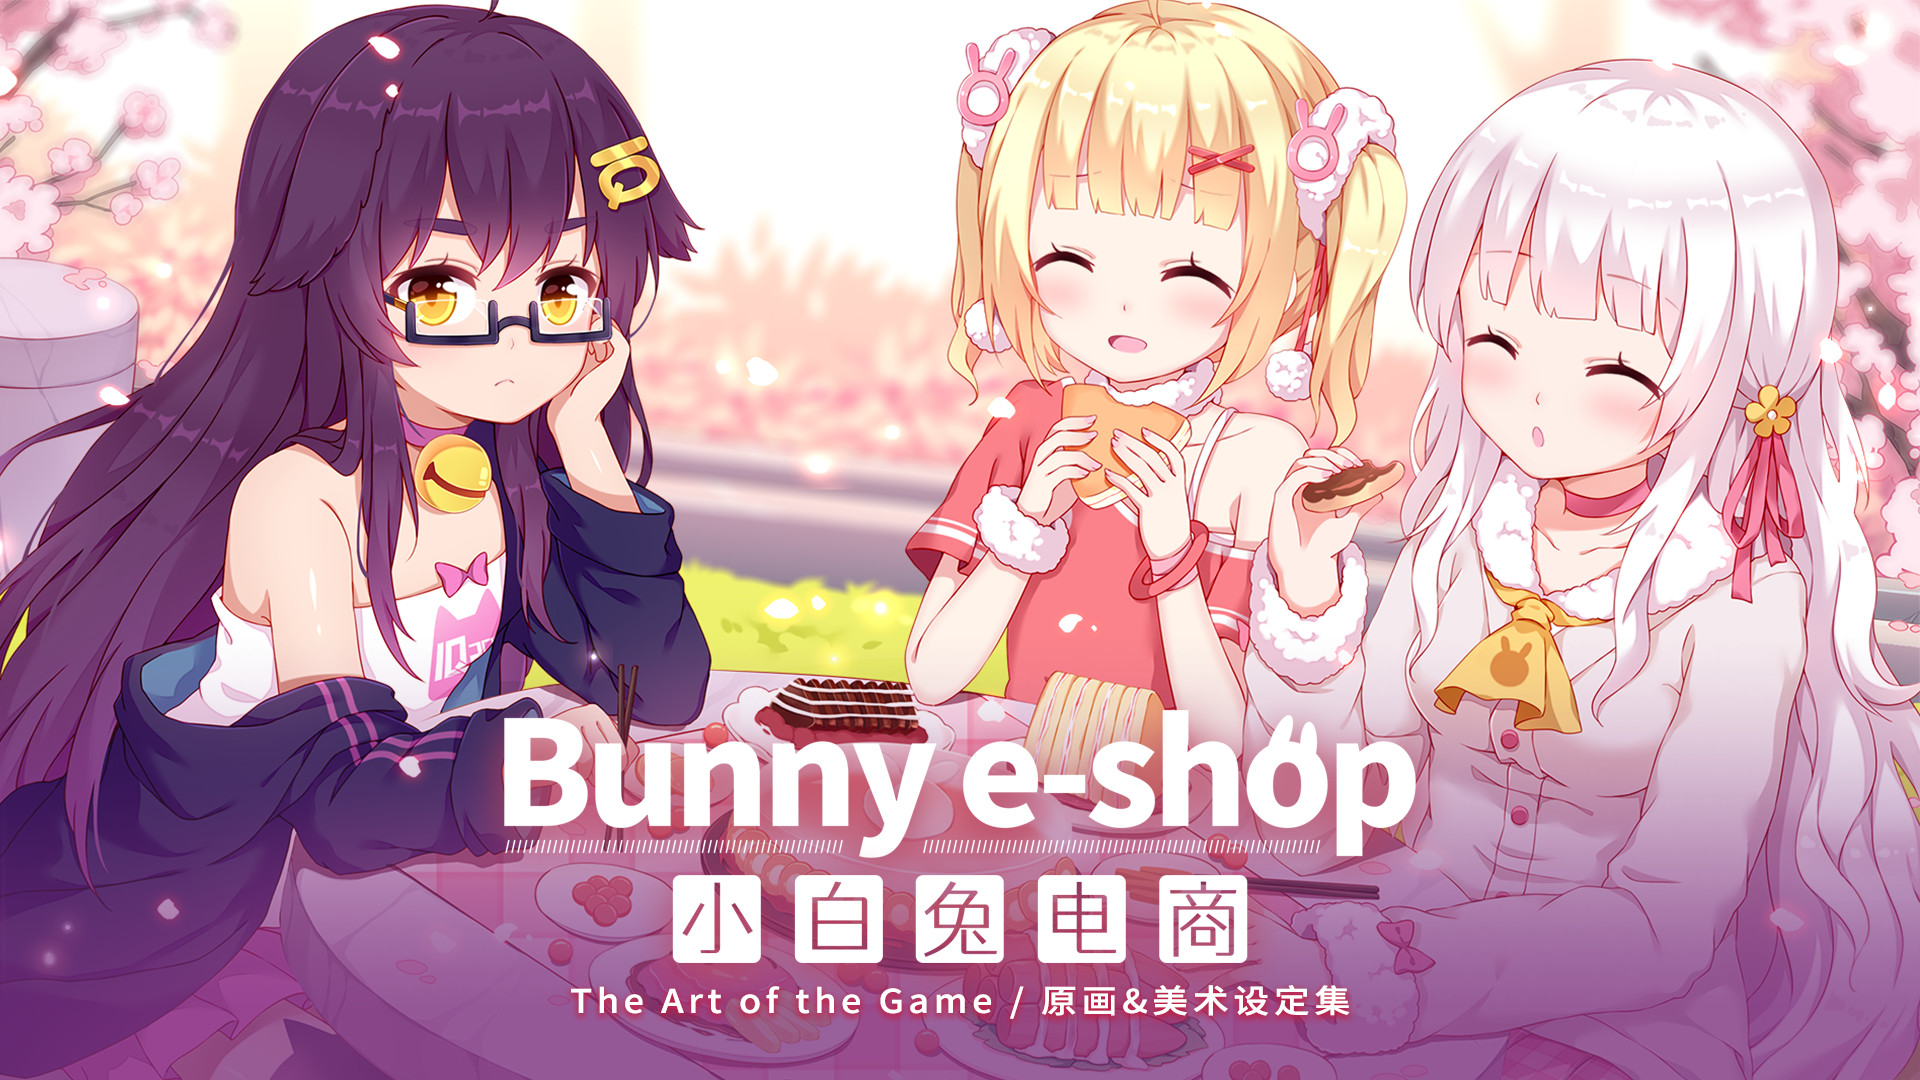 Bunny e-Shop  The Art of the Game Featured Screenshot #1